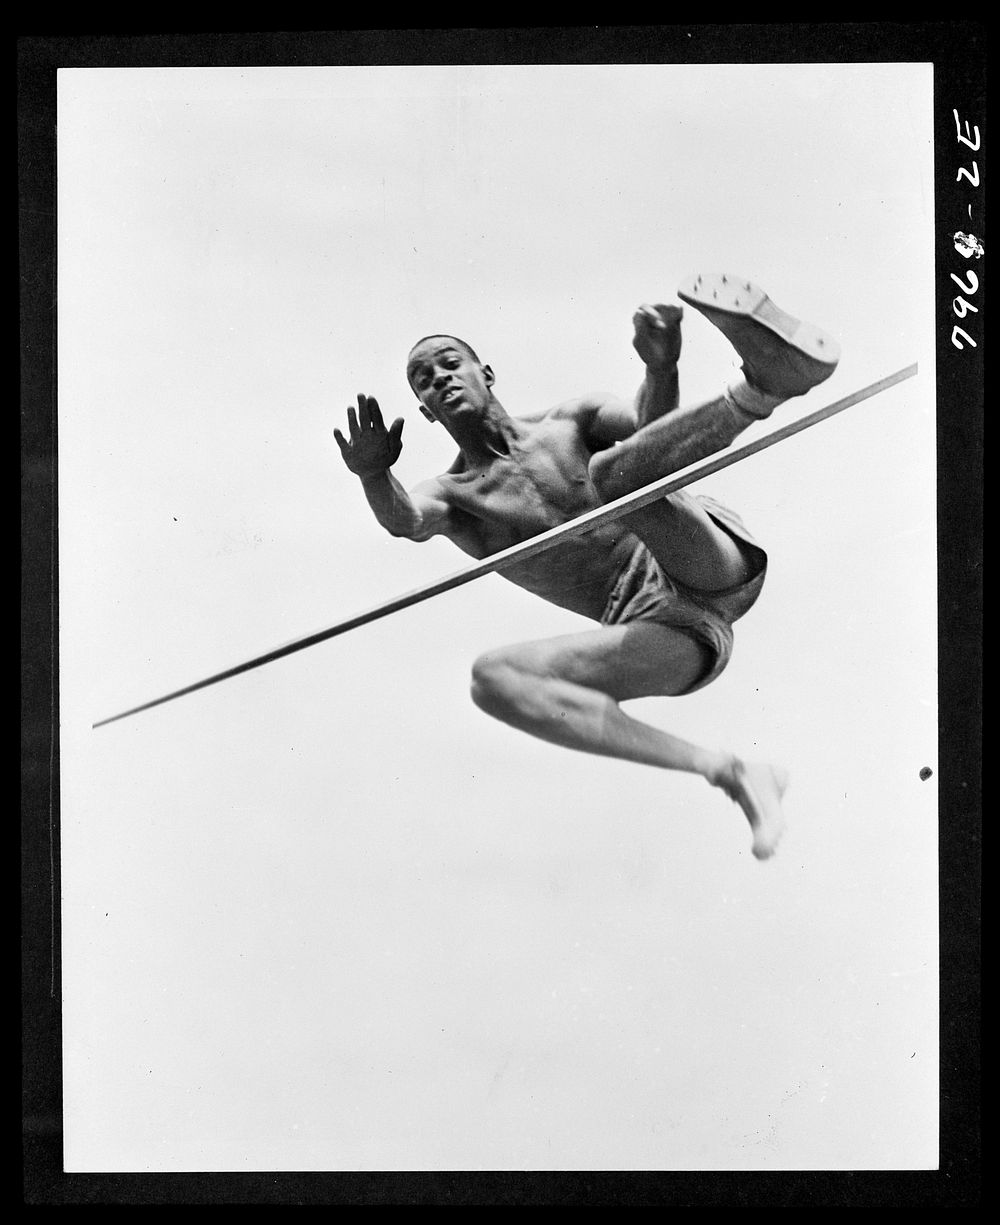 [Untitled photo shows: Cornelius Johnson, winner of the gold medal at the 1936 Olympics, in a high jump ]. Sourced from the…